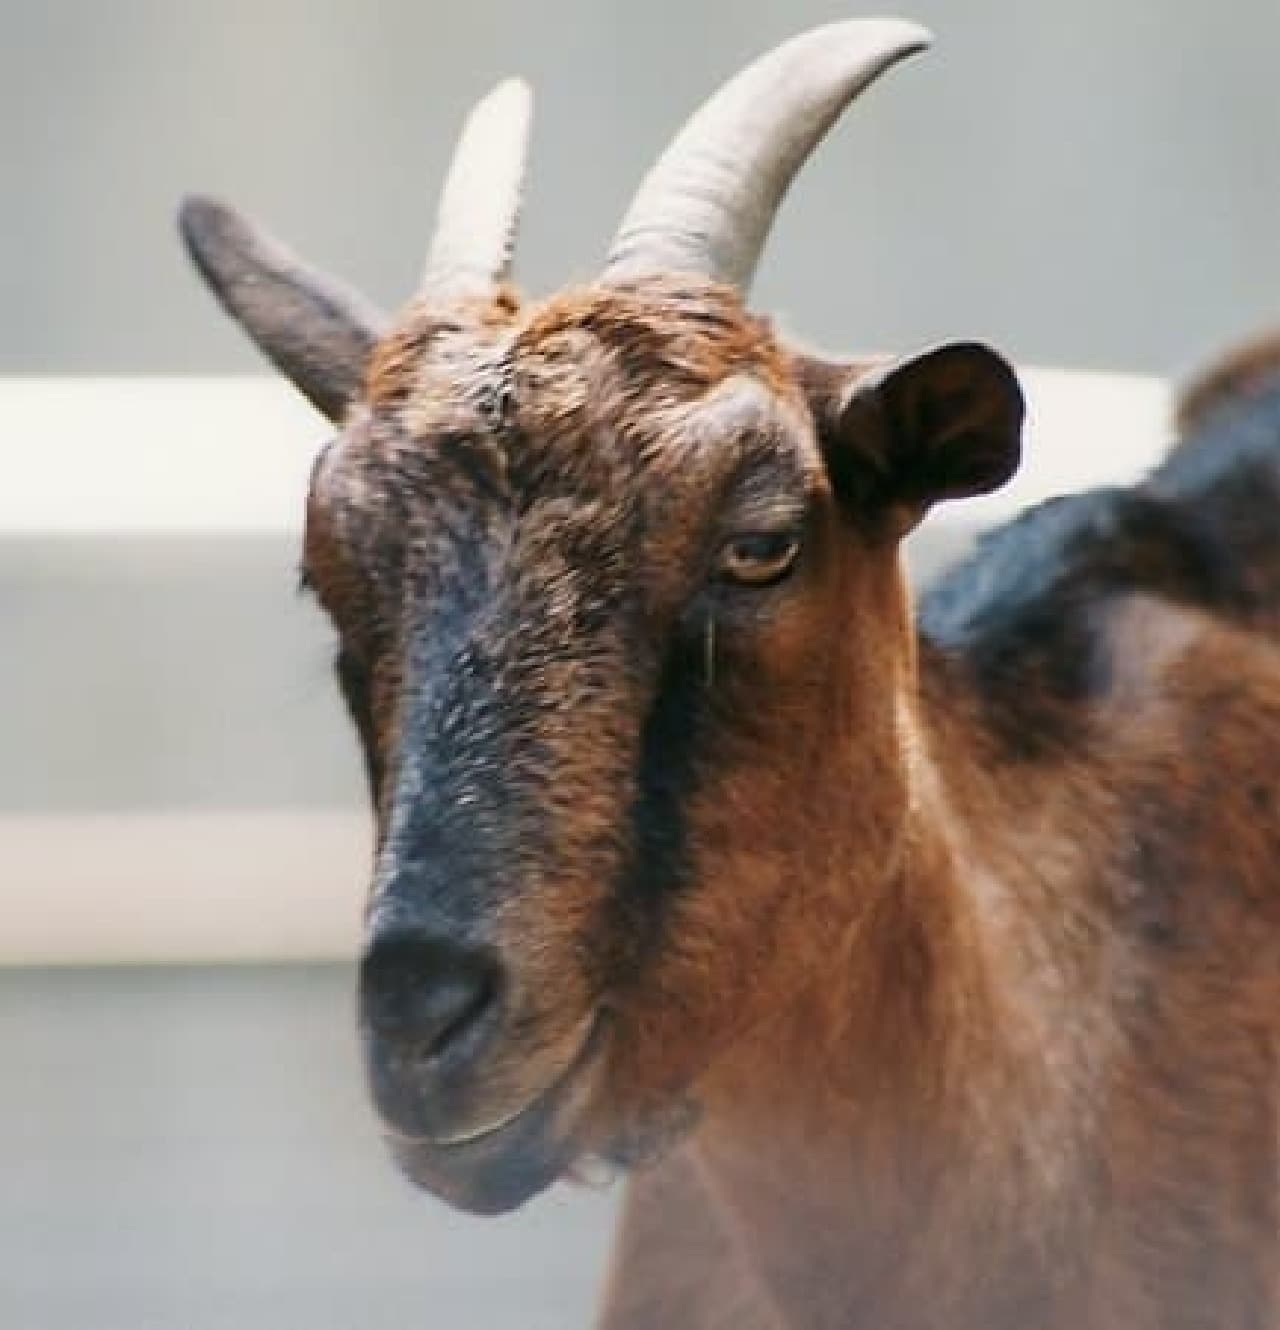 Image of a goat with horns